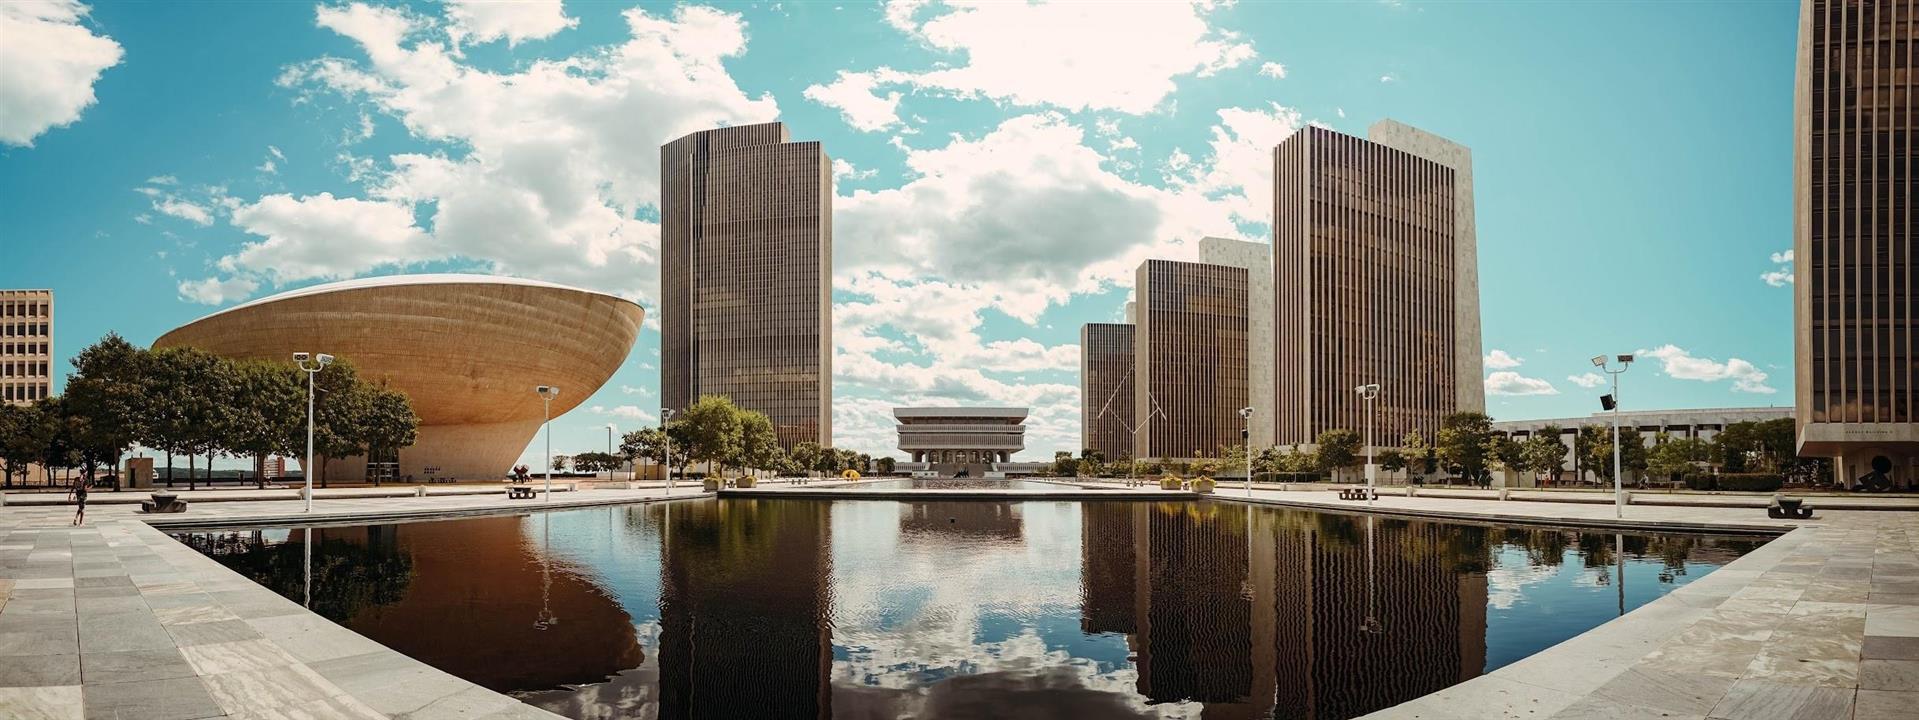 Empire State Plaza Convention Center in Albany, NY